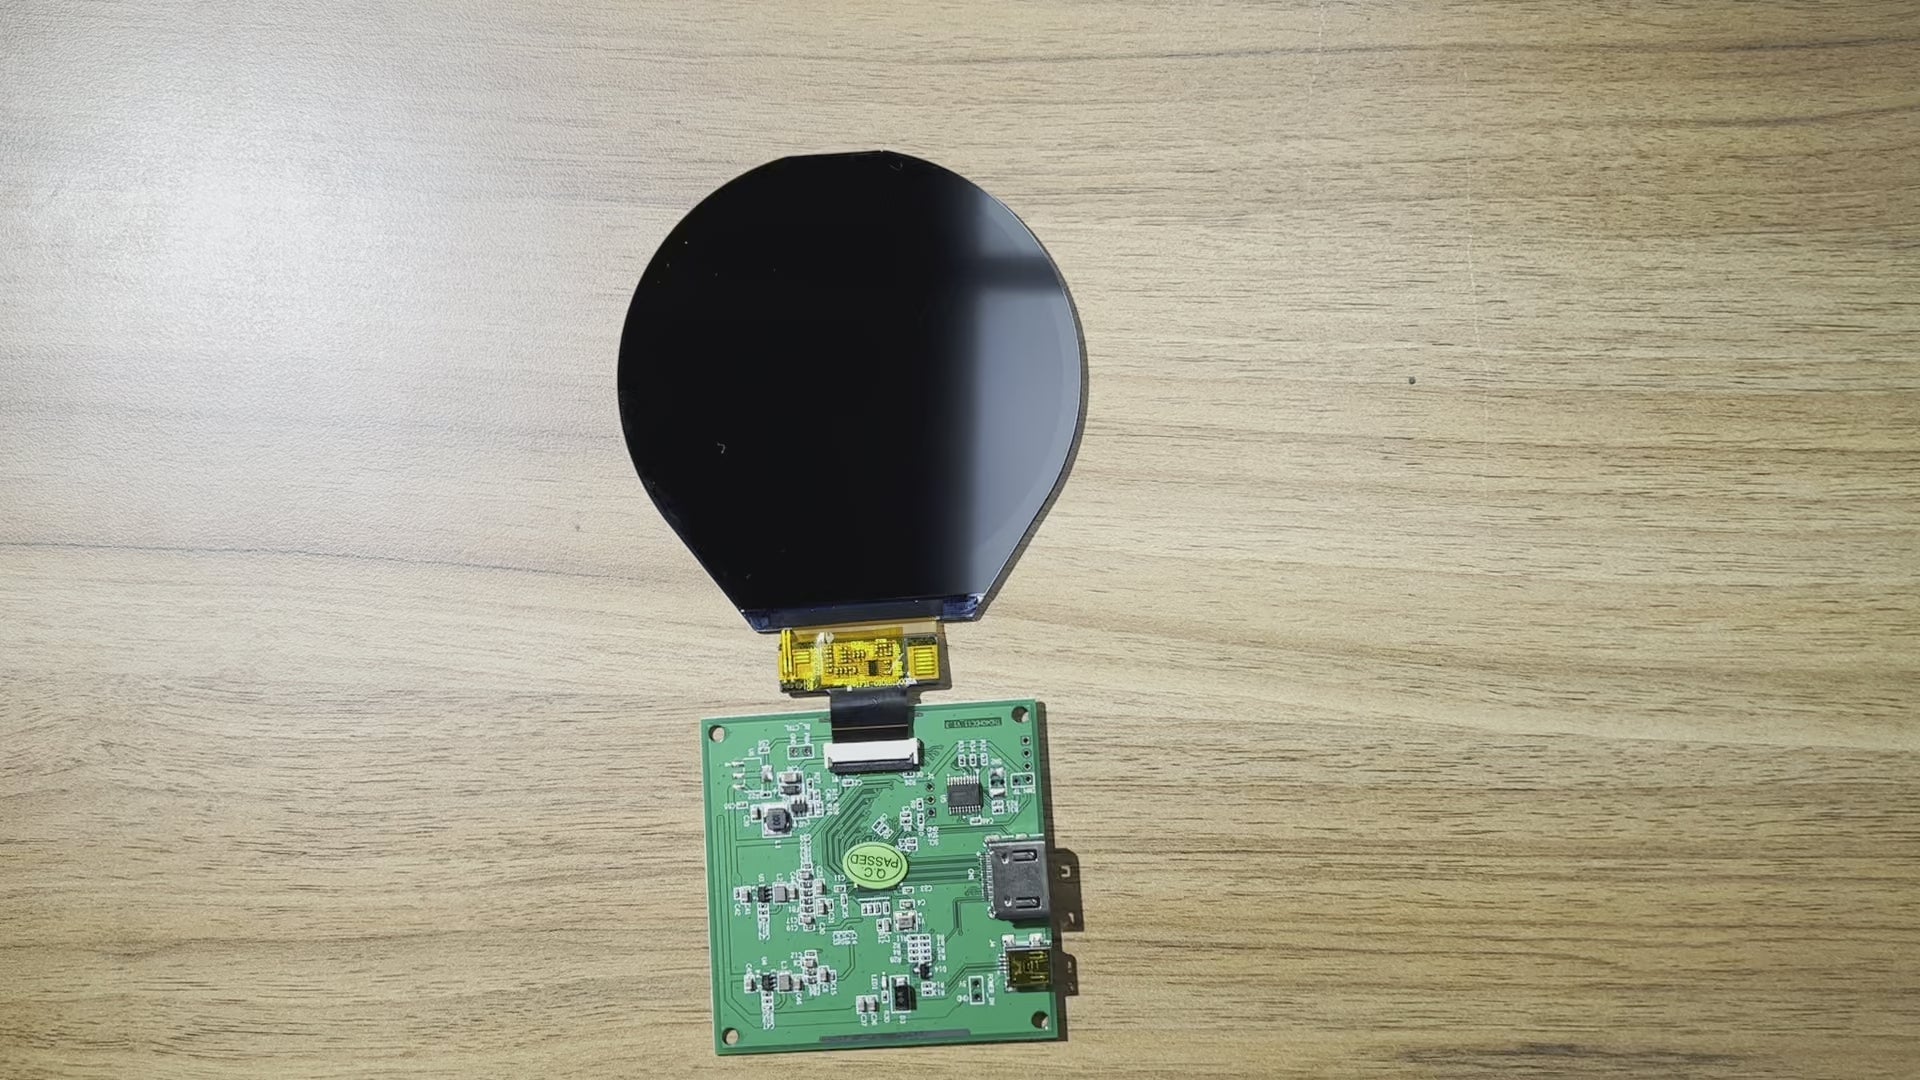 Video of connecting adapter with 3.4-inch round screen